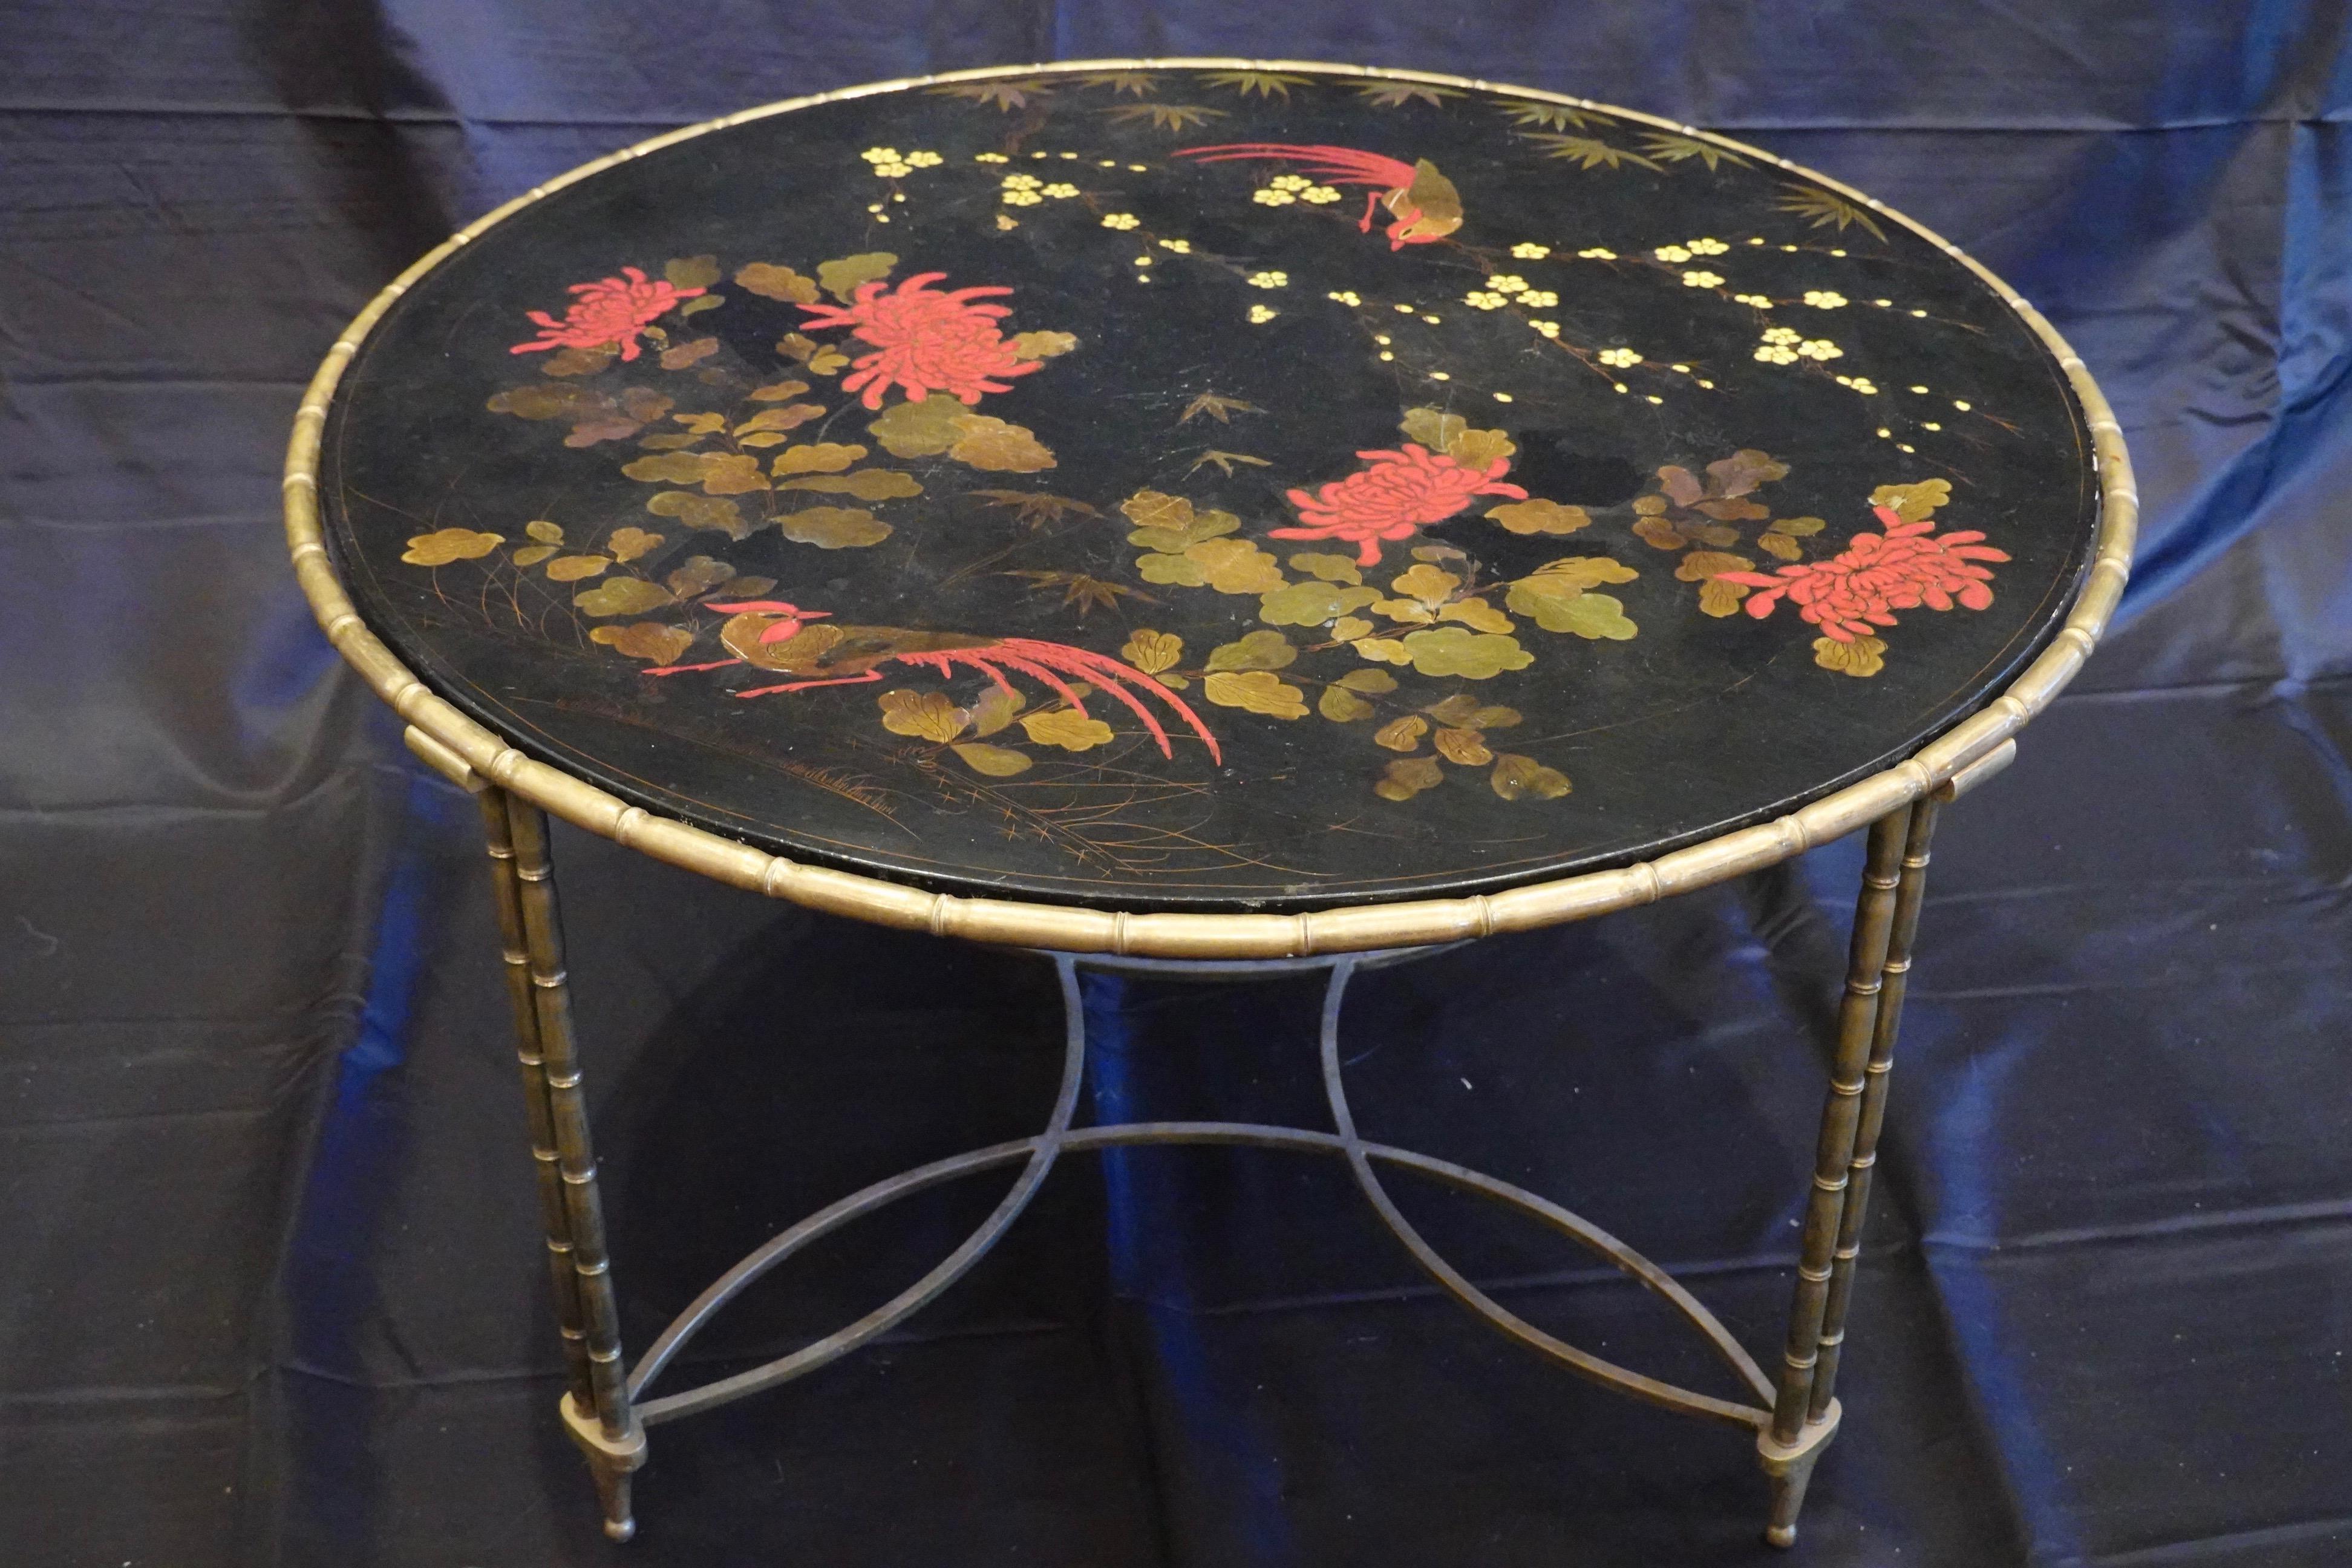 Lovely French round cocktail or coffee table with colorful Japanned lacquered top surface in black ground, featuring red birds and peonies, yellow flowers and bamboo leaves. The frame of the table is nicely-cast faux bamboo in bronze, supported by